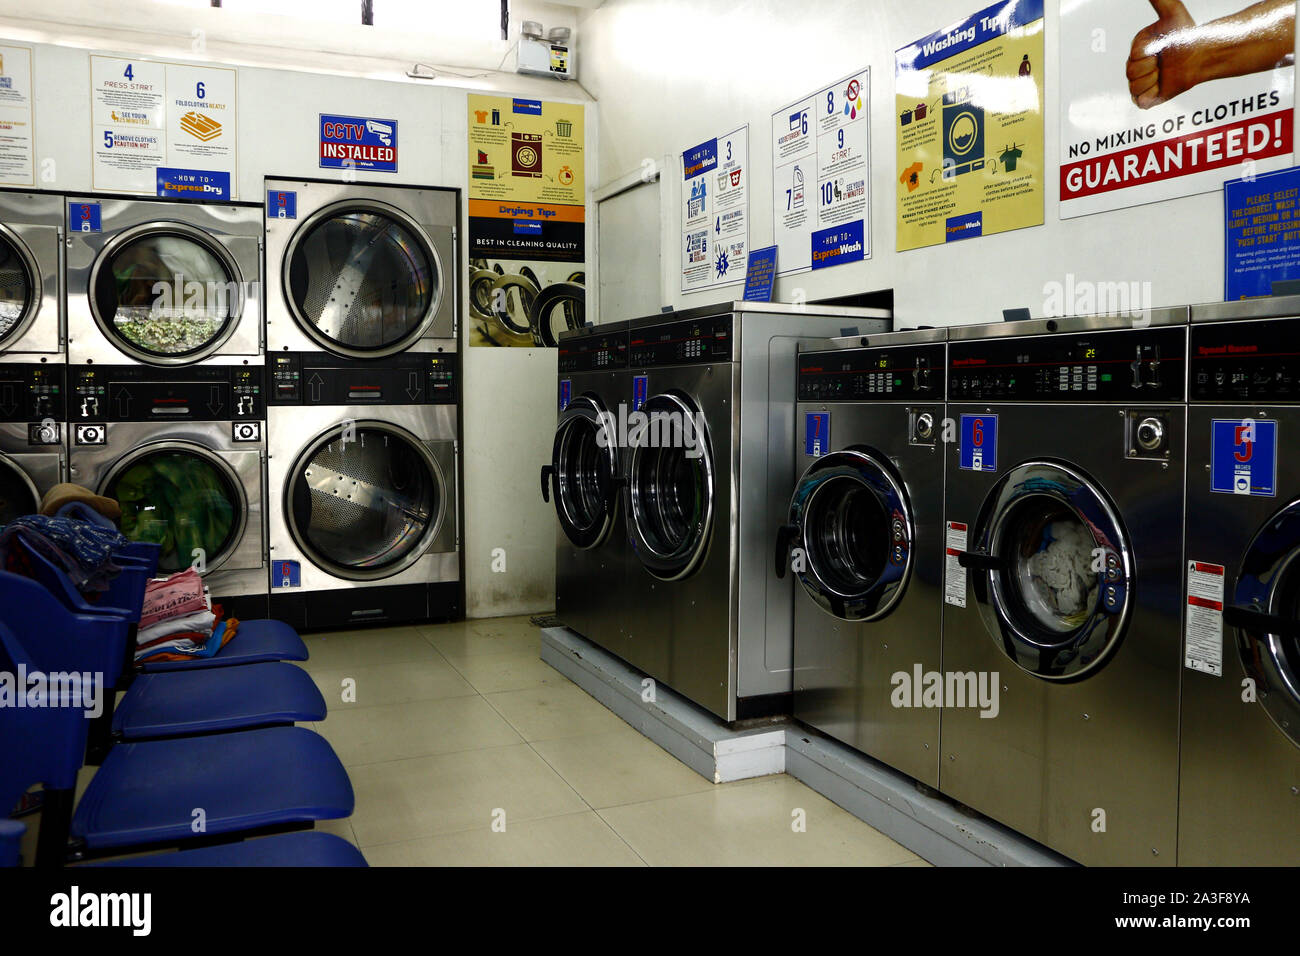 Laundry Shop High Resolution Stock Photography and Images - Alamy